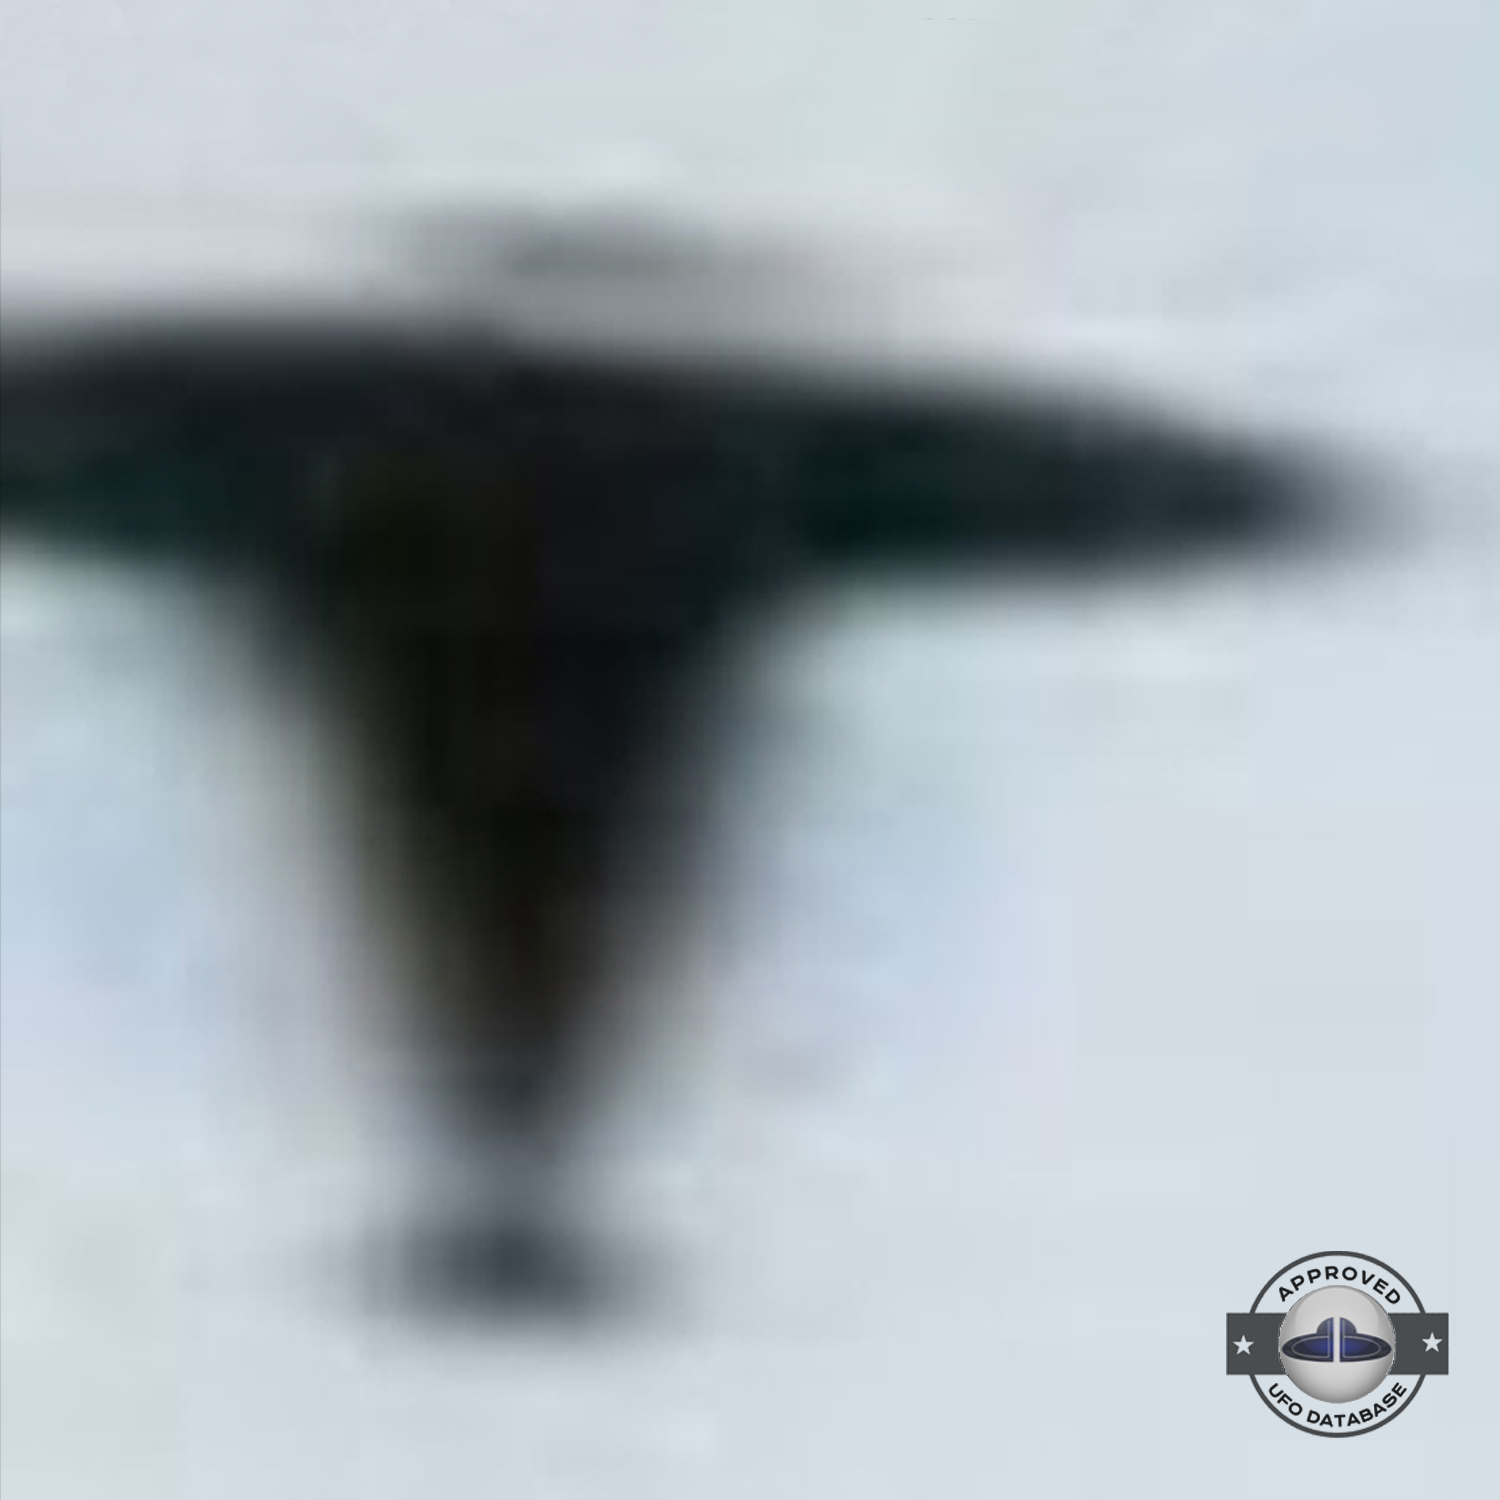 UFO picture taken from moving Train | Oberwesel, Germany | March 1964 UFO Picture #178-6